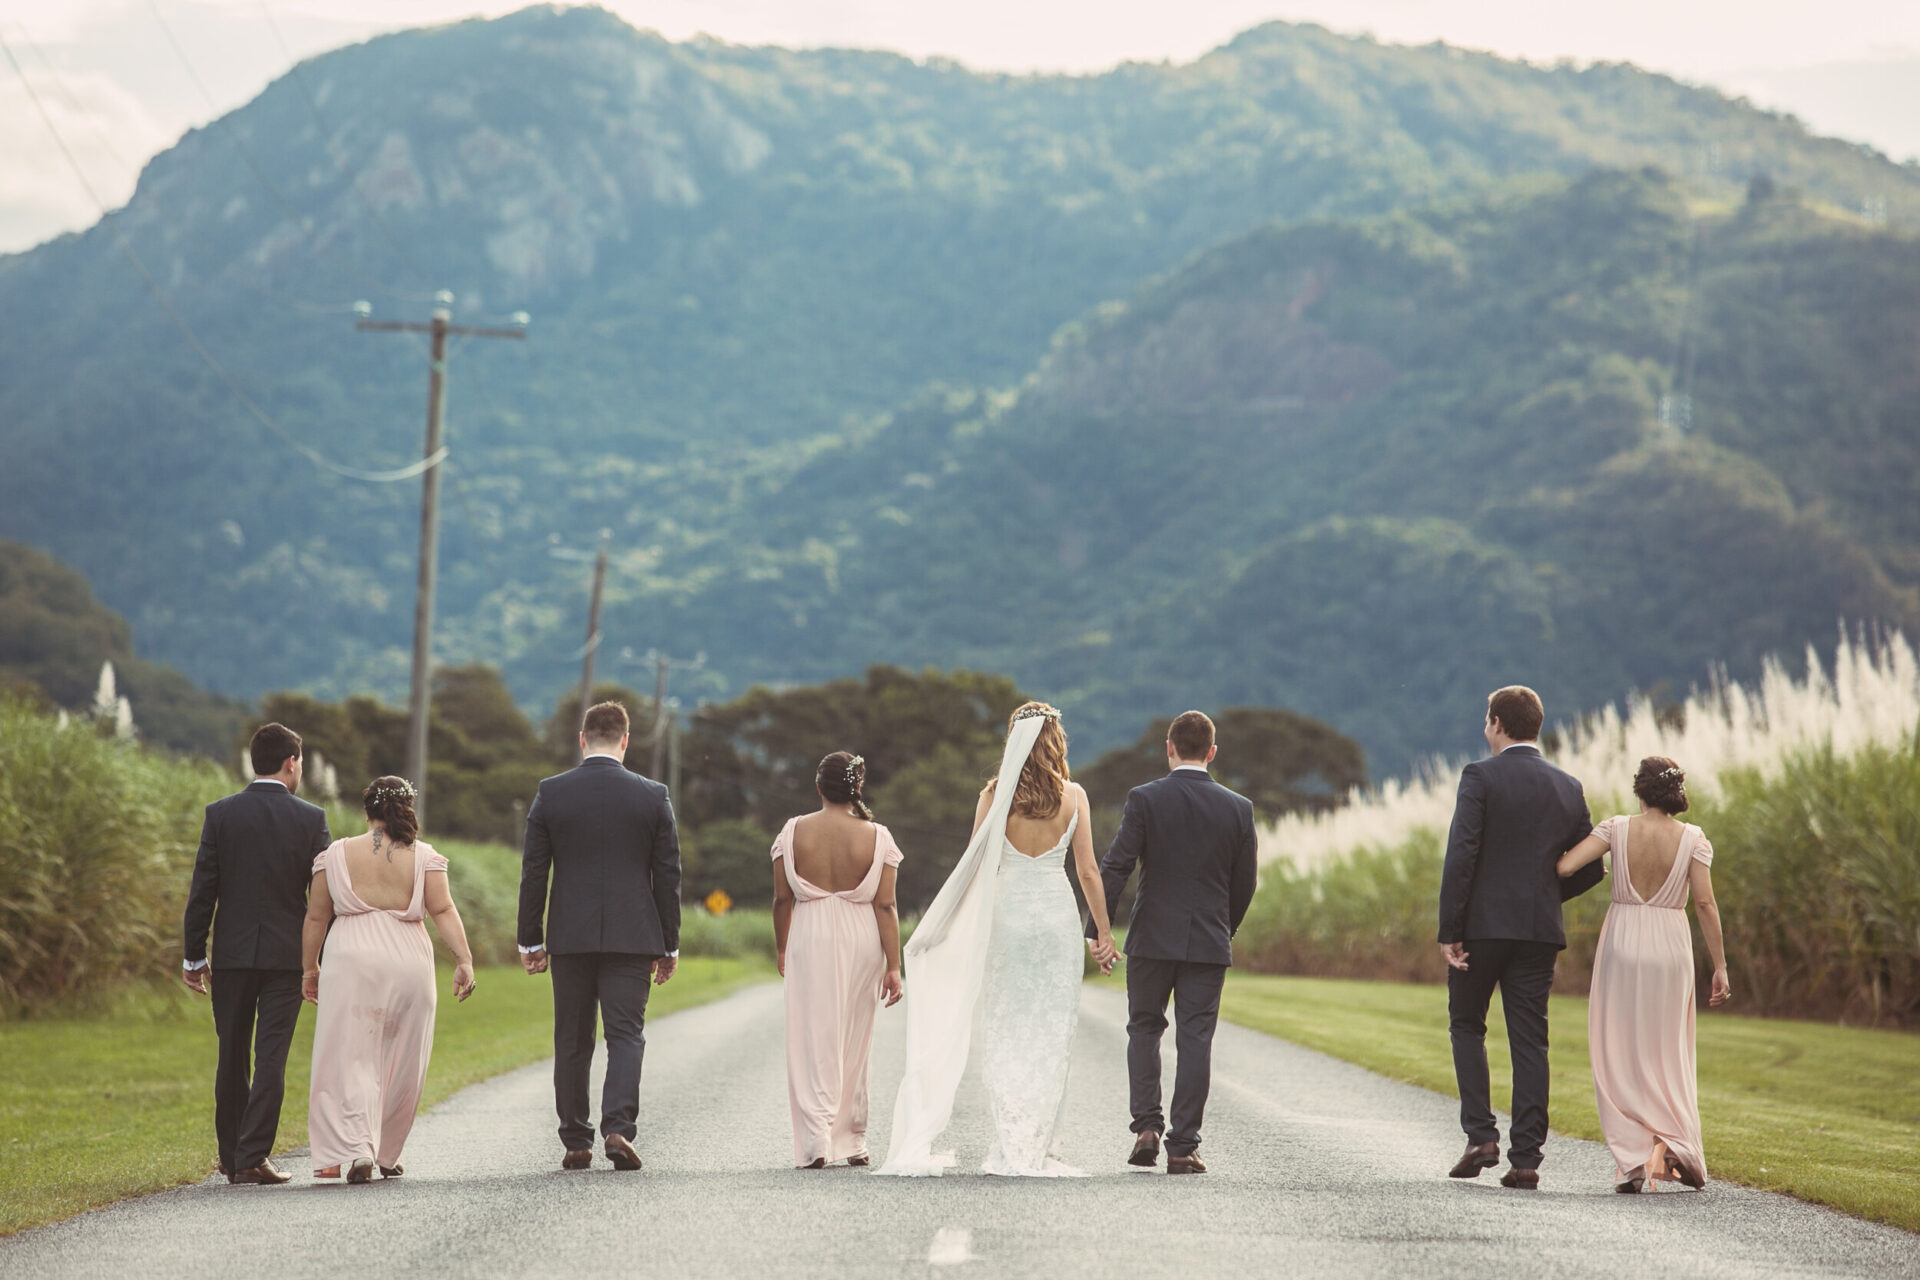 Bridal party, bride, groom and groomsmen walking on road near canefields